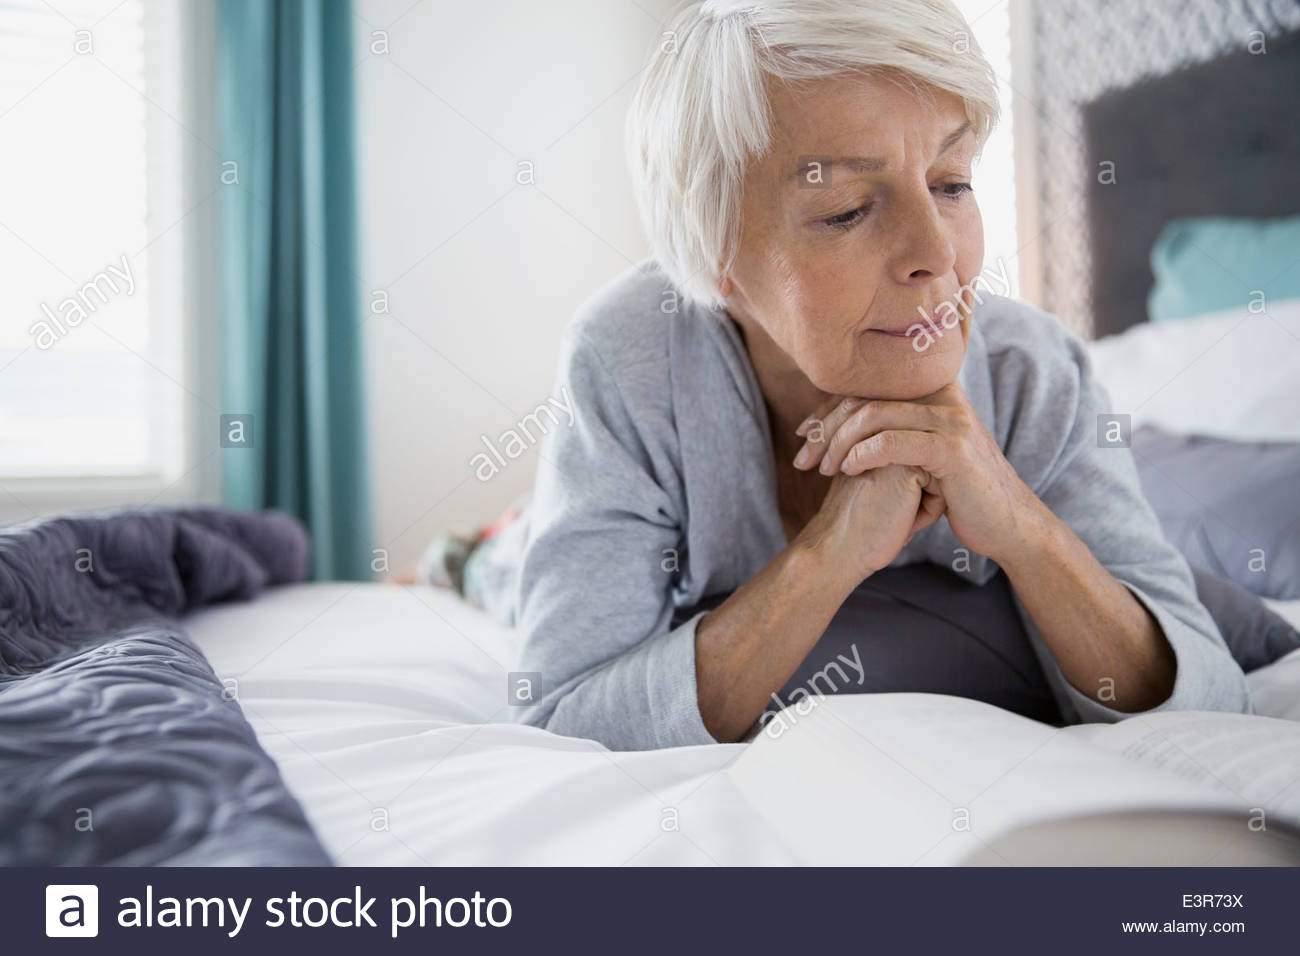 Woman reading book in bed Stock Photo